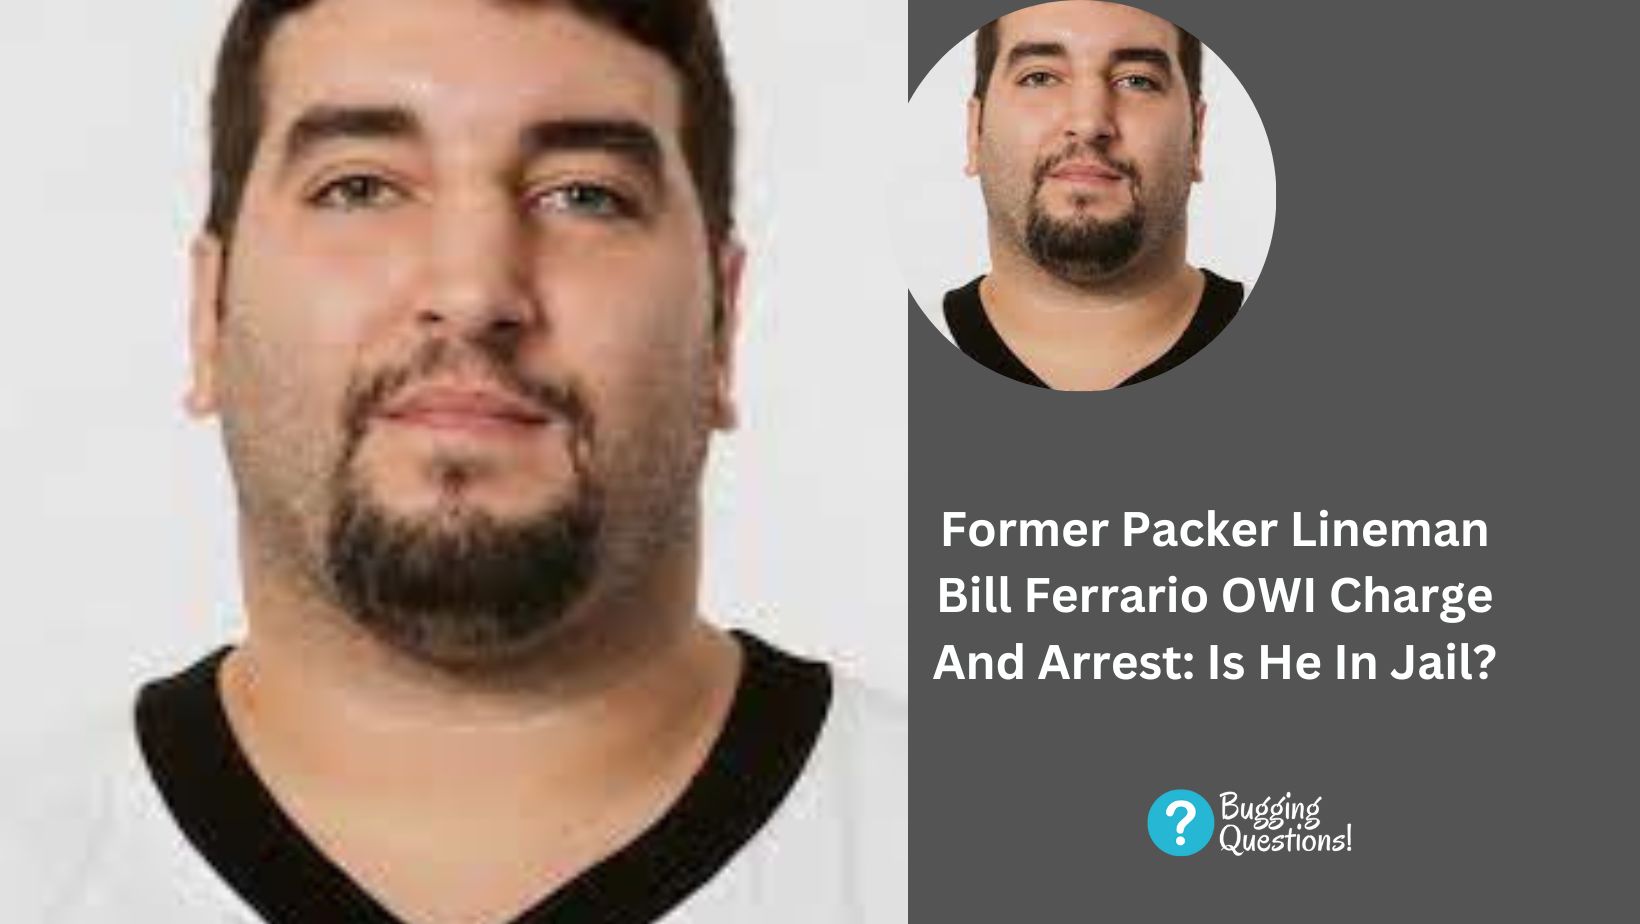 Former Packer Lineman Bill Ferrario OWI Charge And Arrest: Is He In Jail?